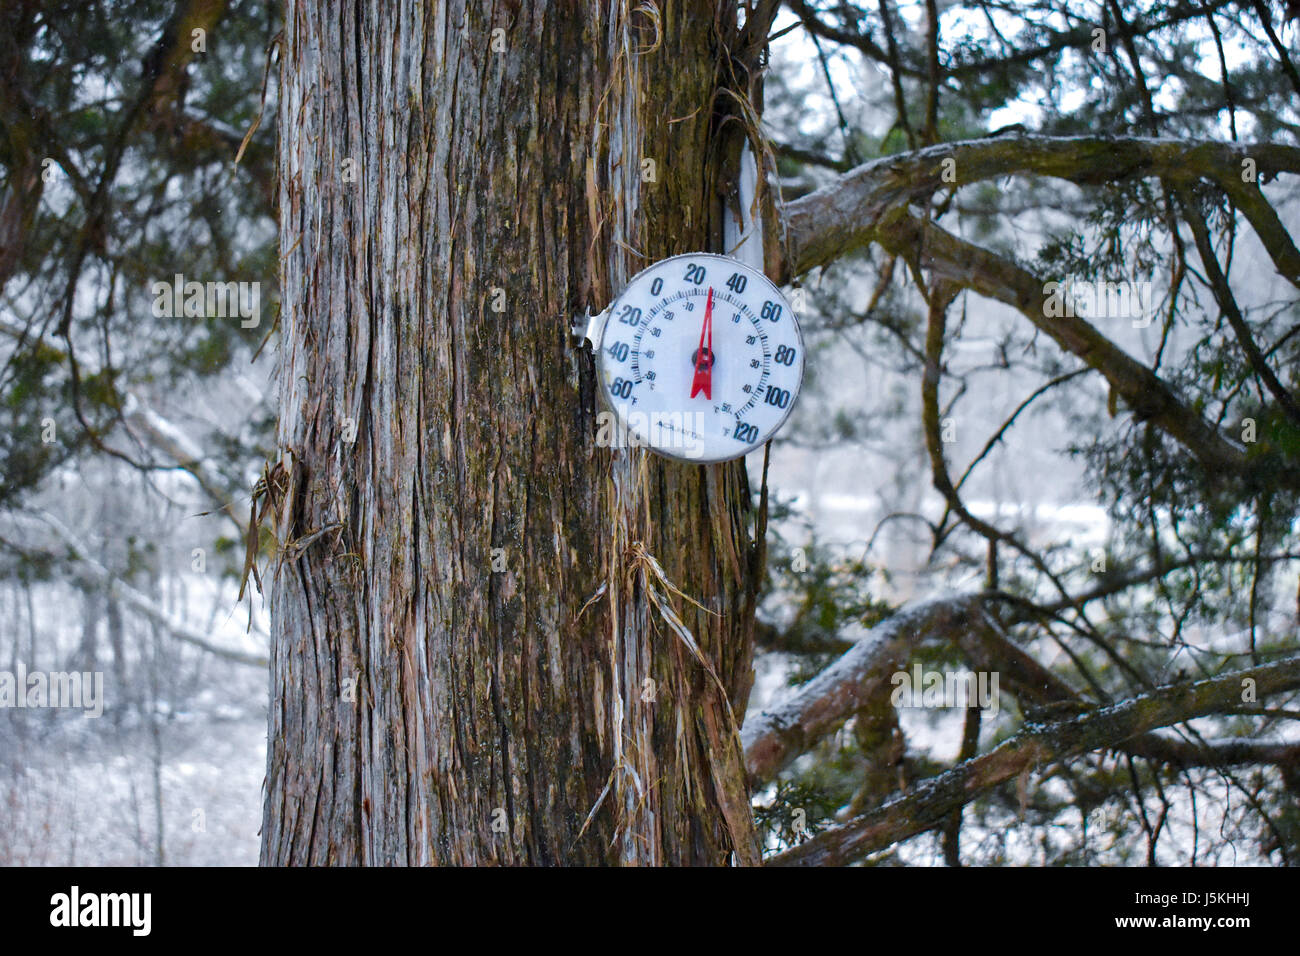 https://c8.alamy.com/comp/J5KHHJ/tree-in-the-winter-covered-in-snow-with-the-thermometer-showing-the-J5KHHJ.jpg